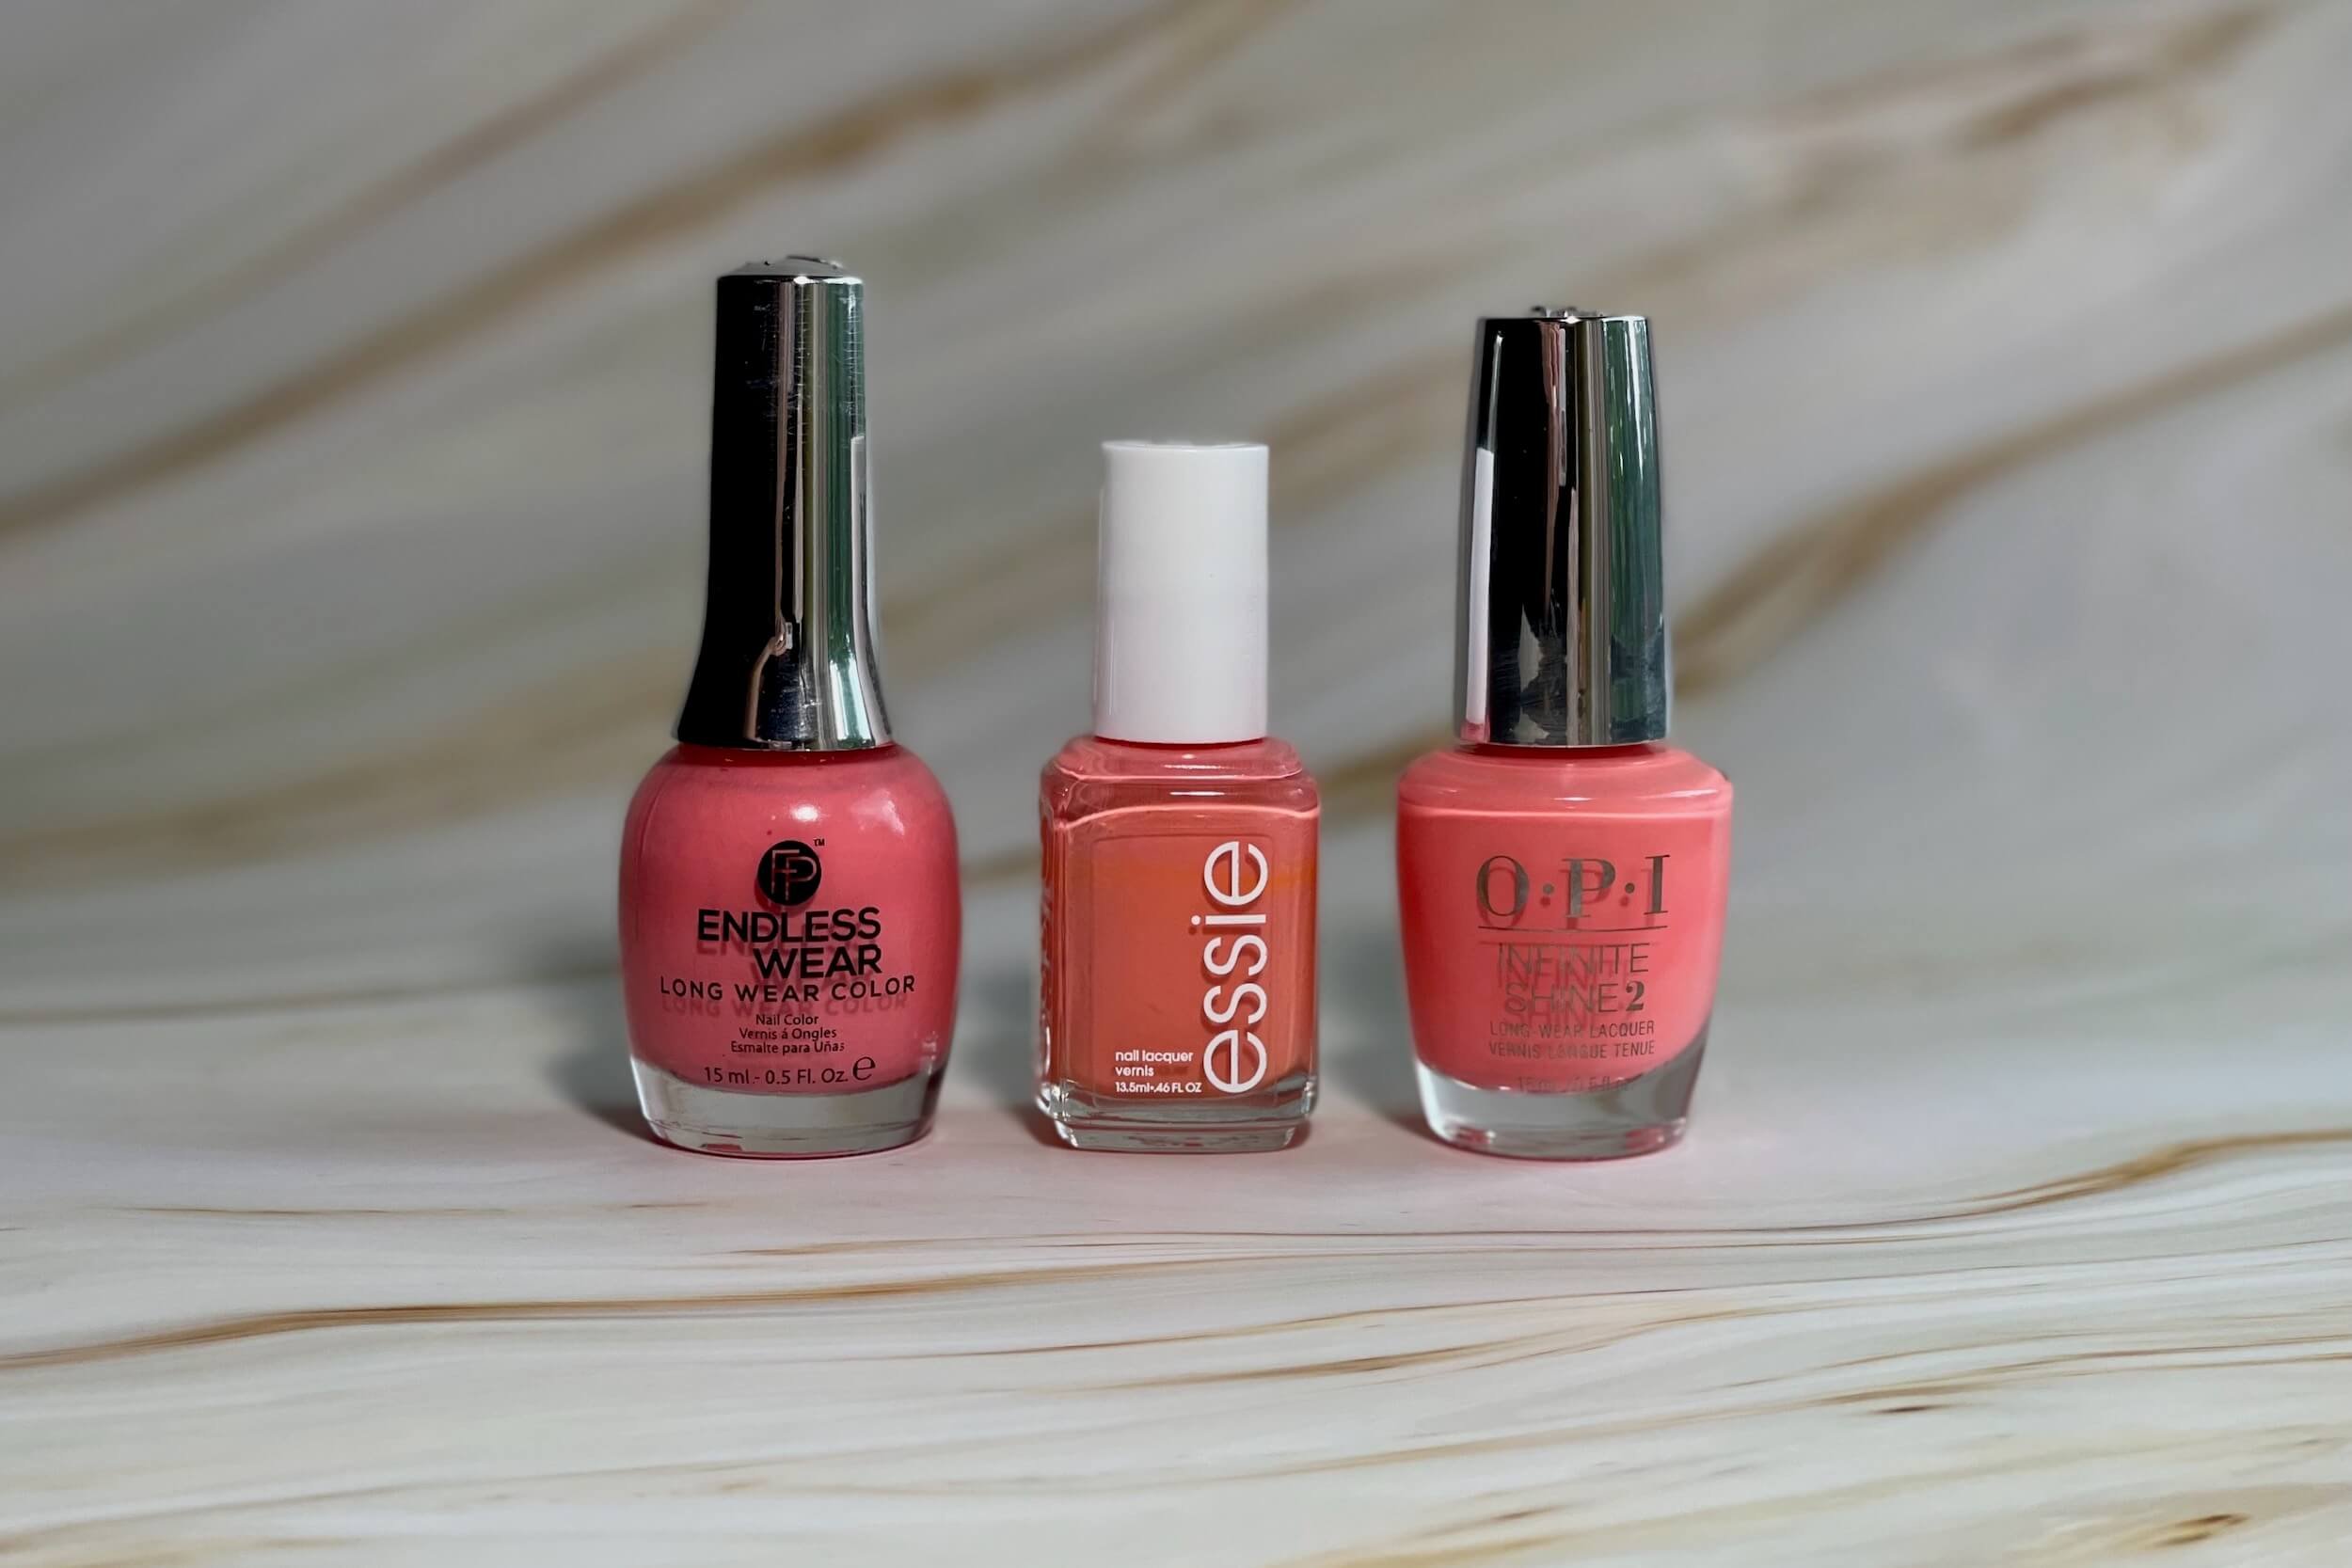 Trendy Nail Polish Colors for a Stylish Manicure